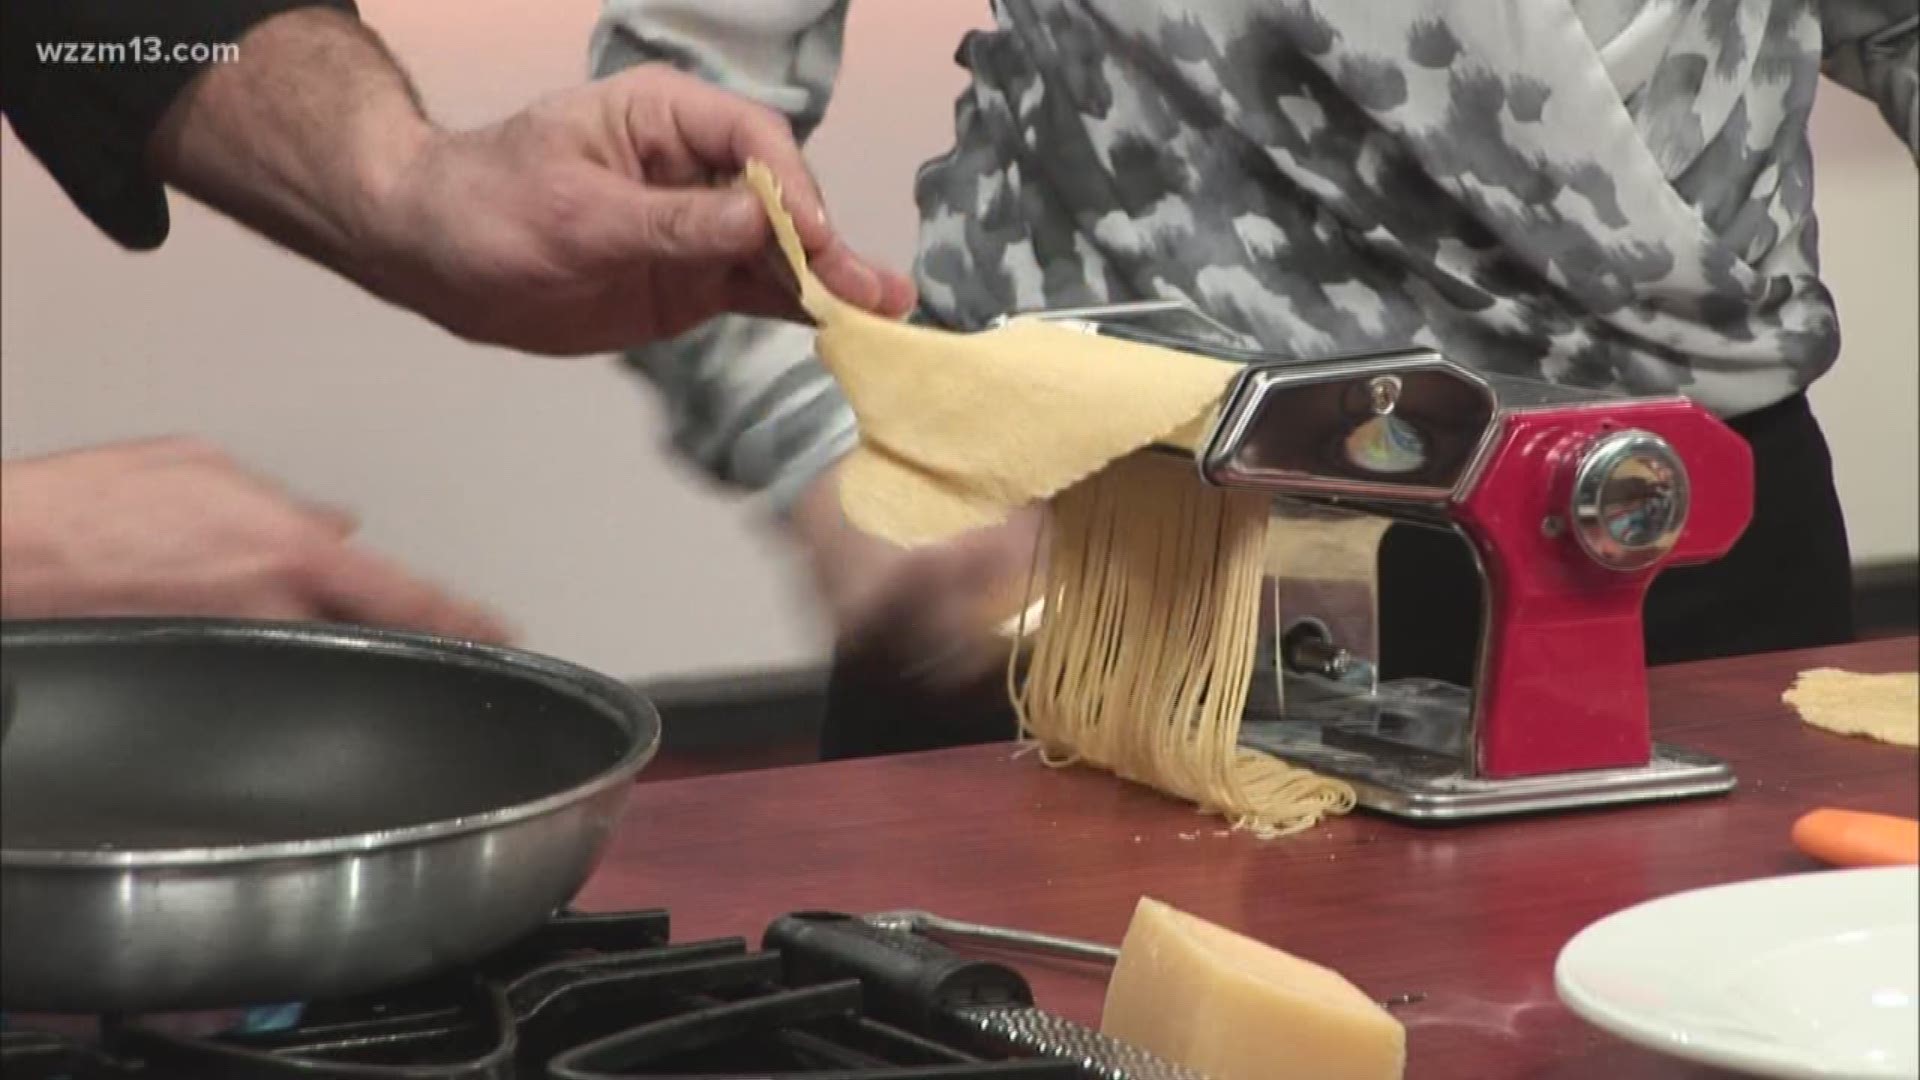 Make homemade pasta with the family